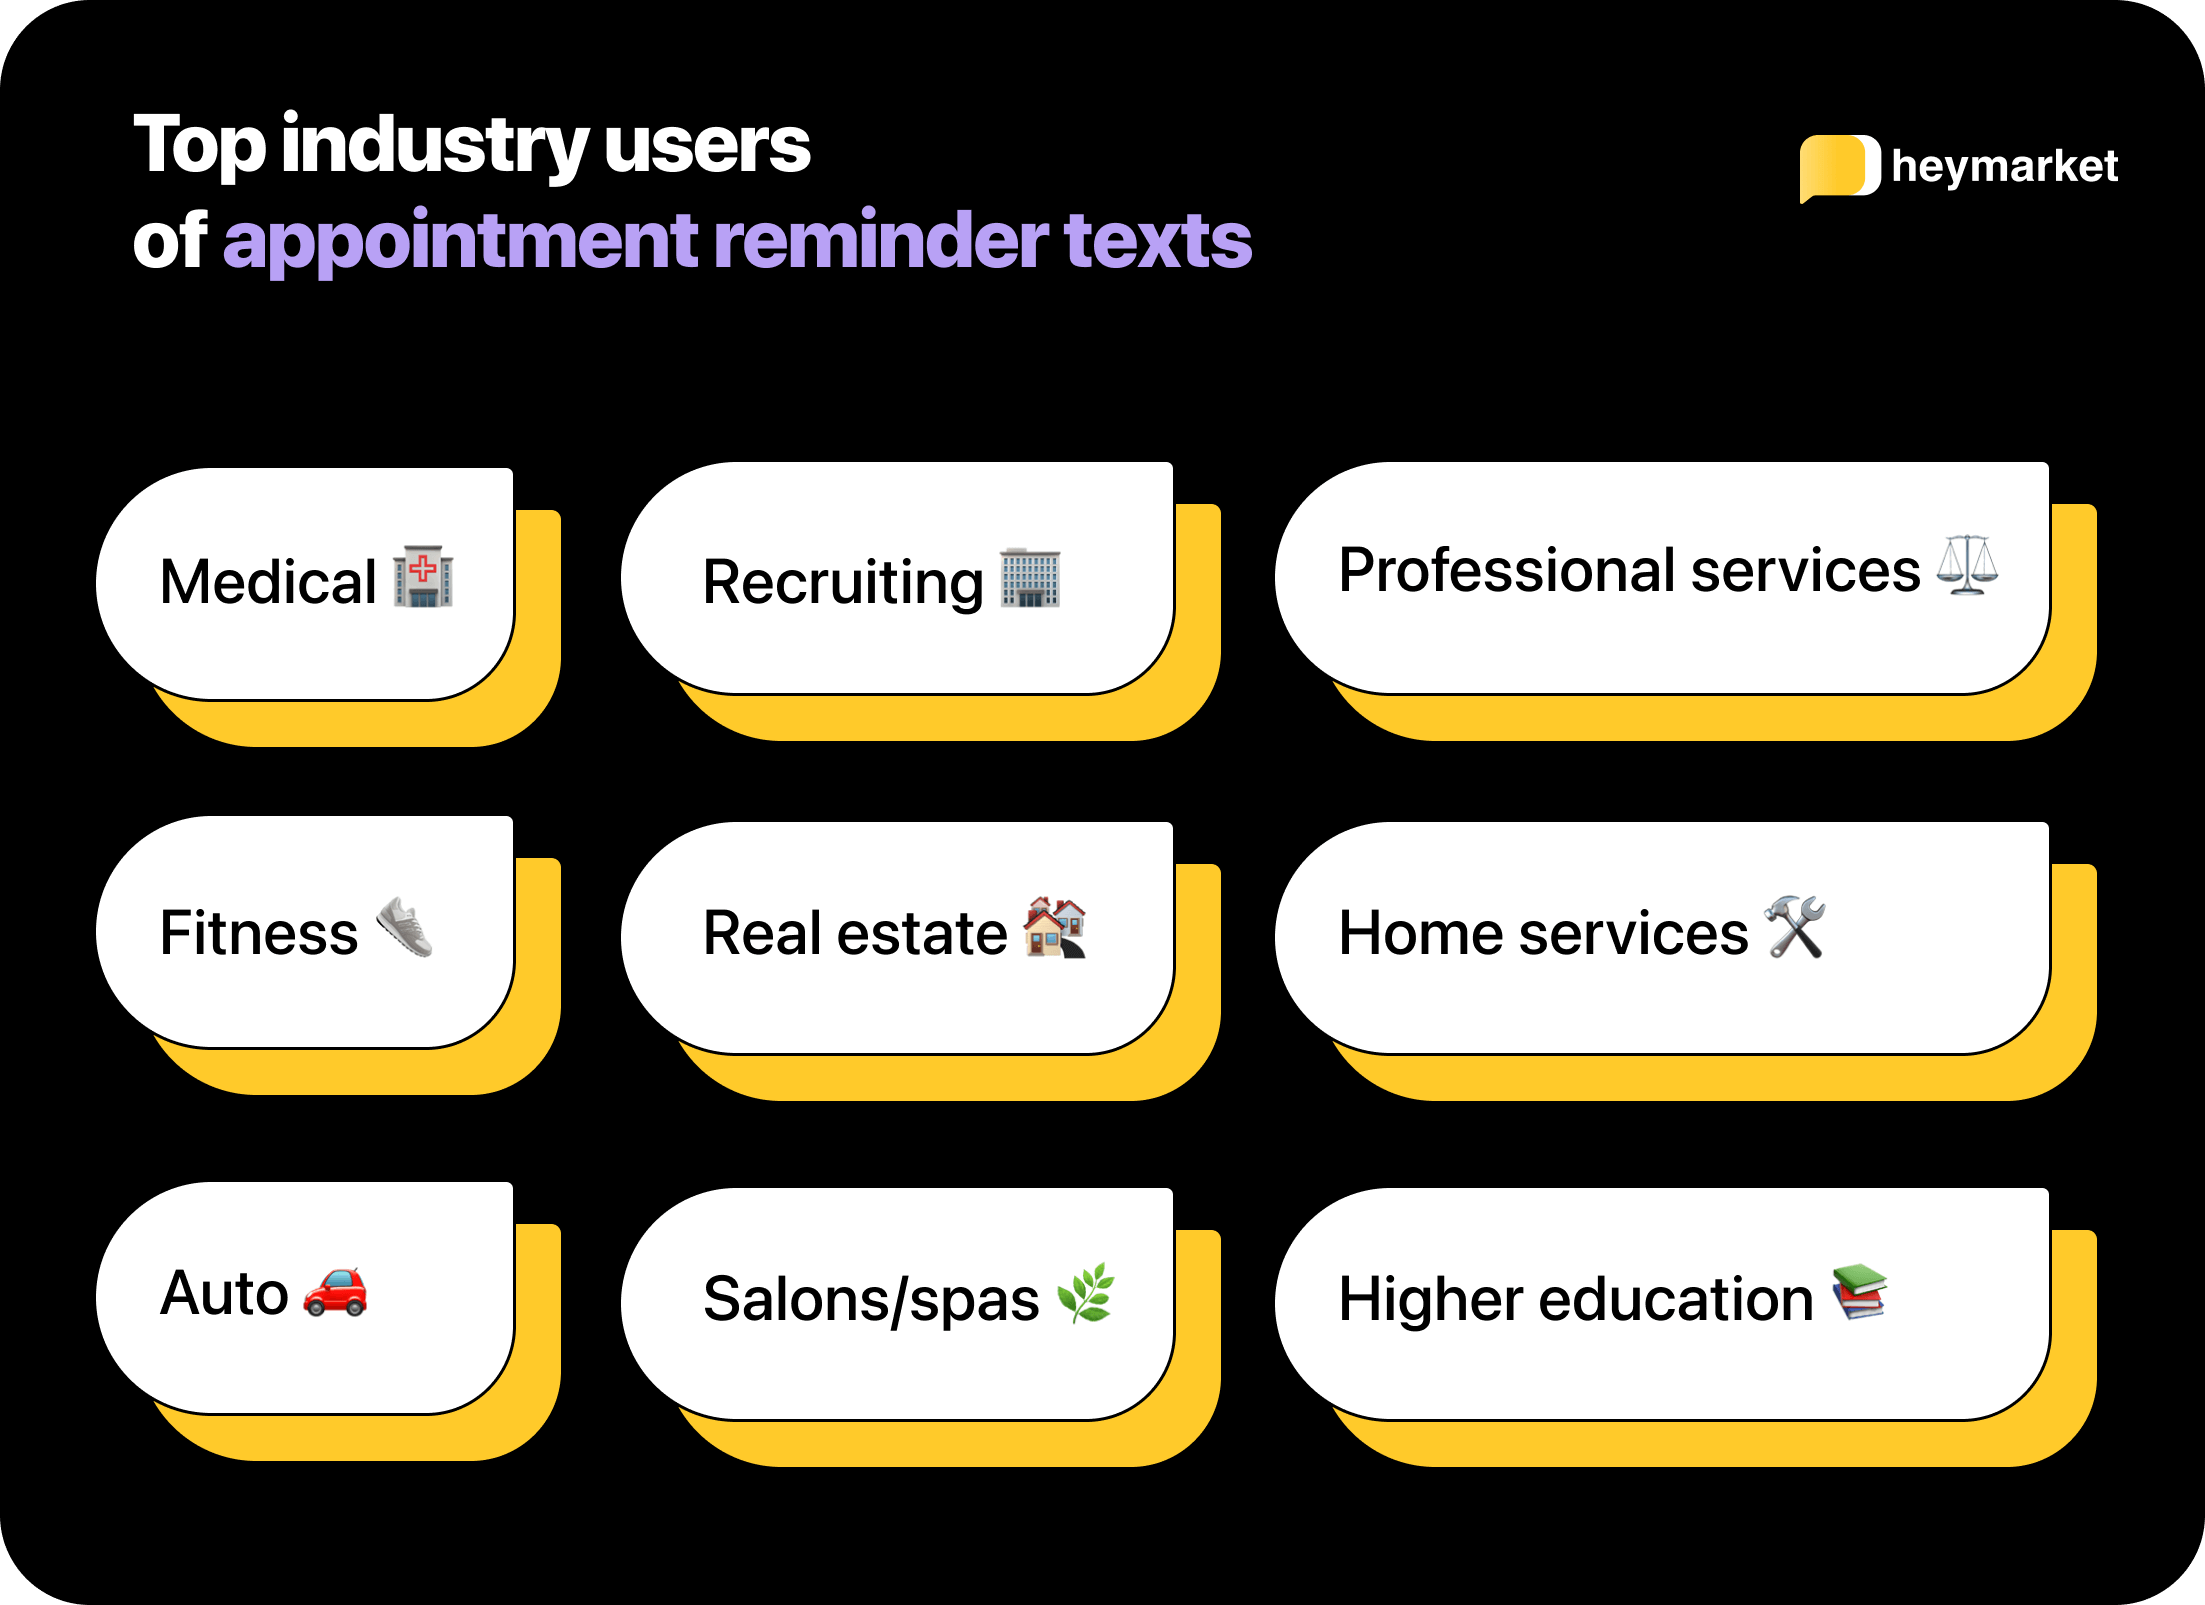 Top industry users of appointment reminder texts